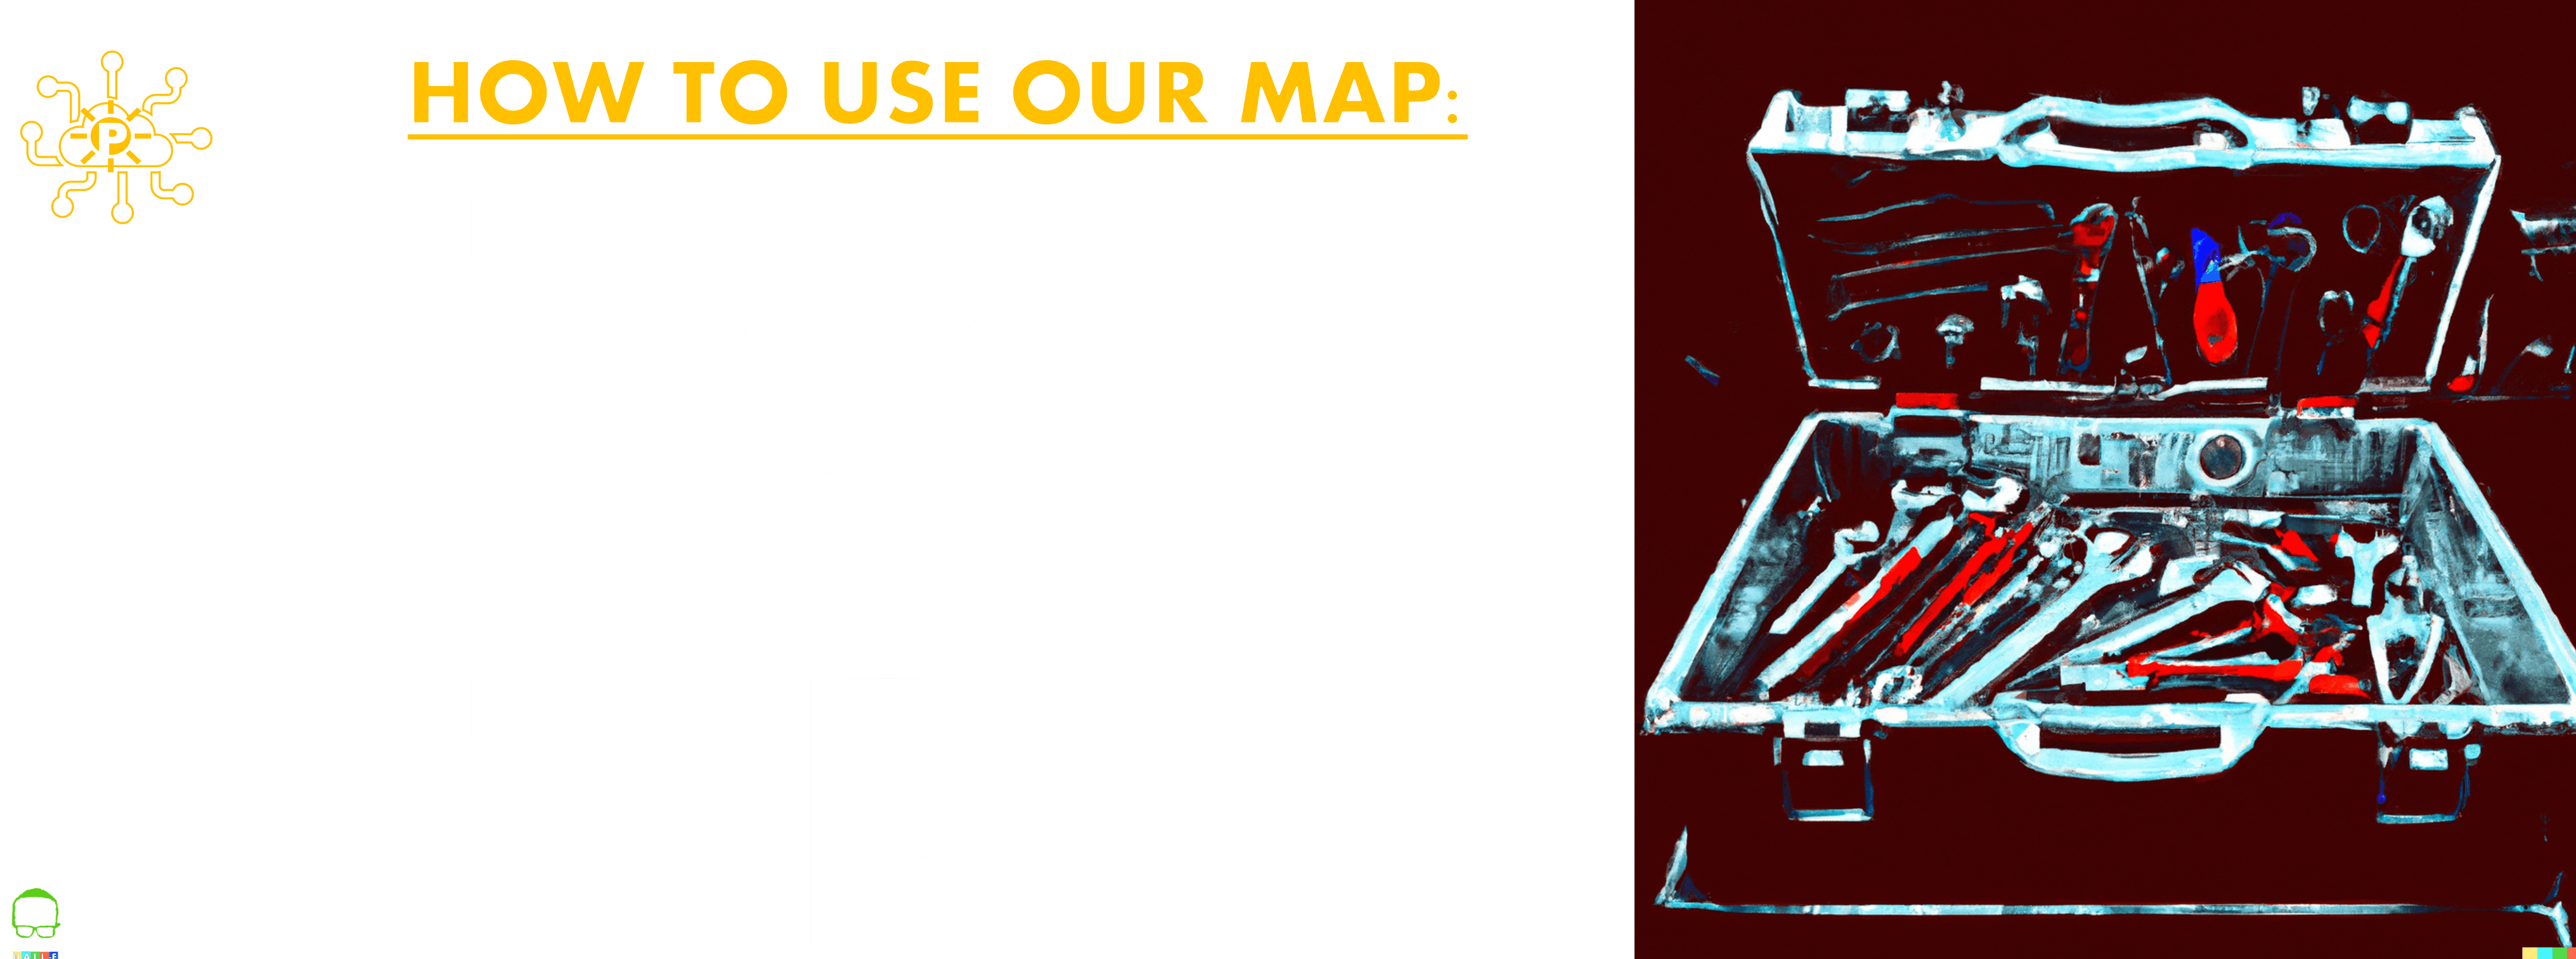 How To Use Our Map: Tool Tips